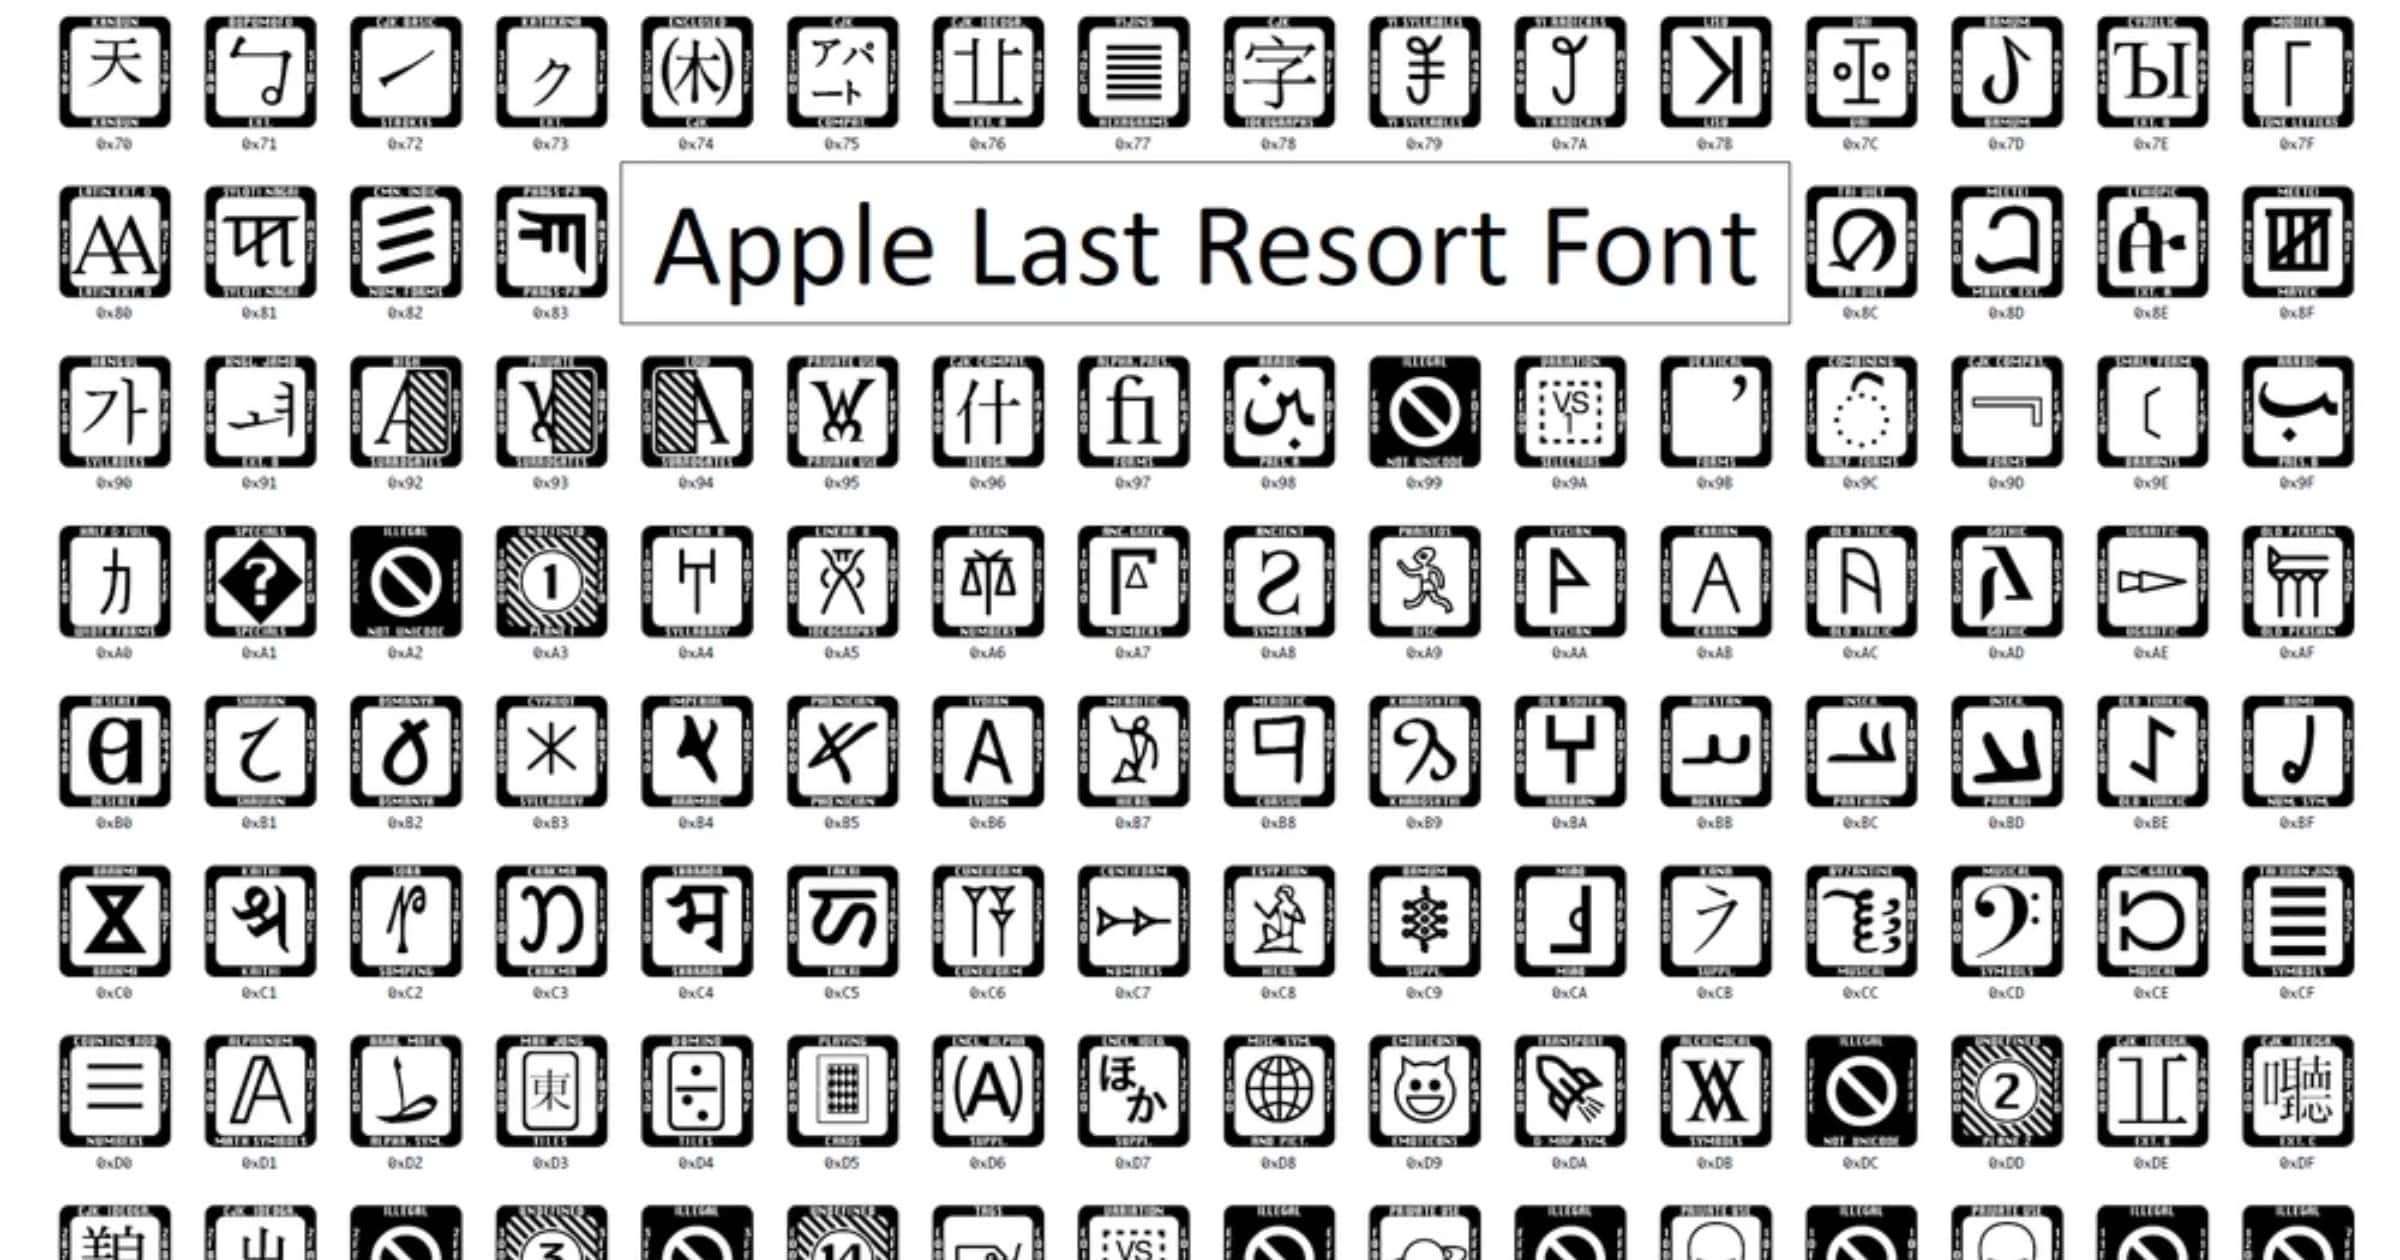 ‘LastResort’, the Story Behind the Mac’s Mysterious Font